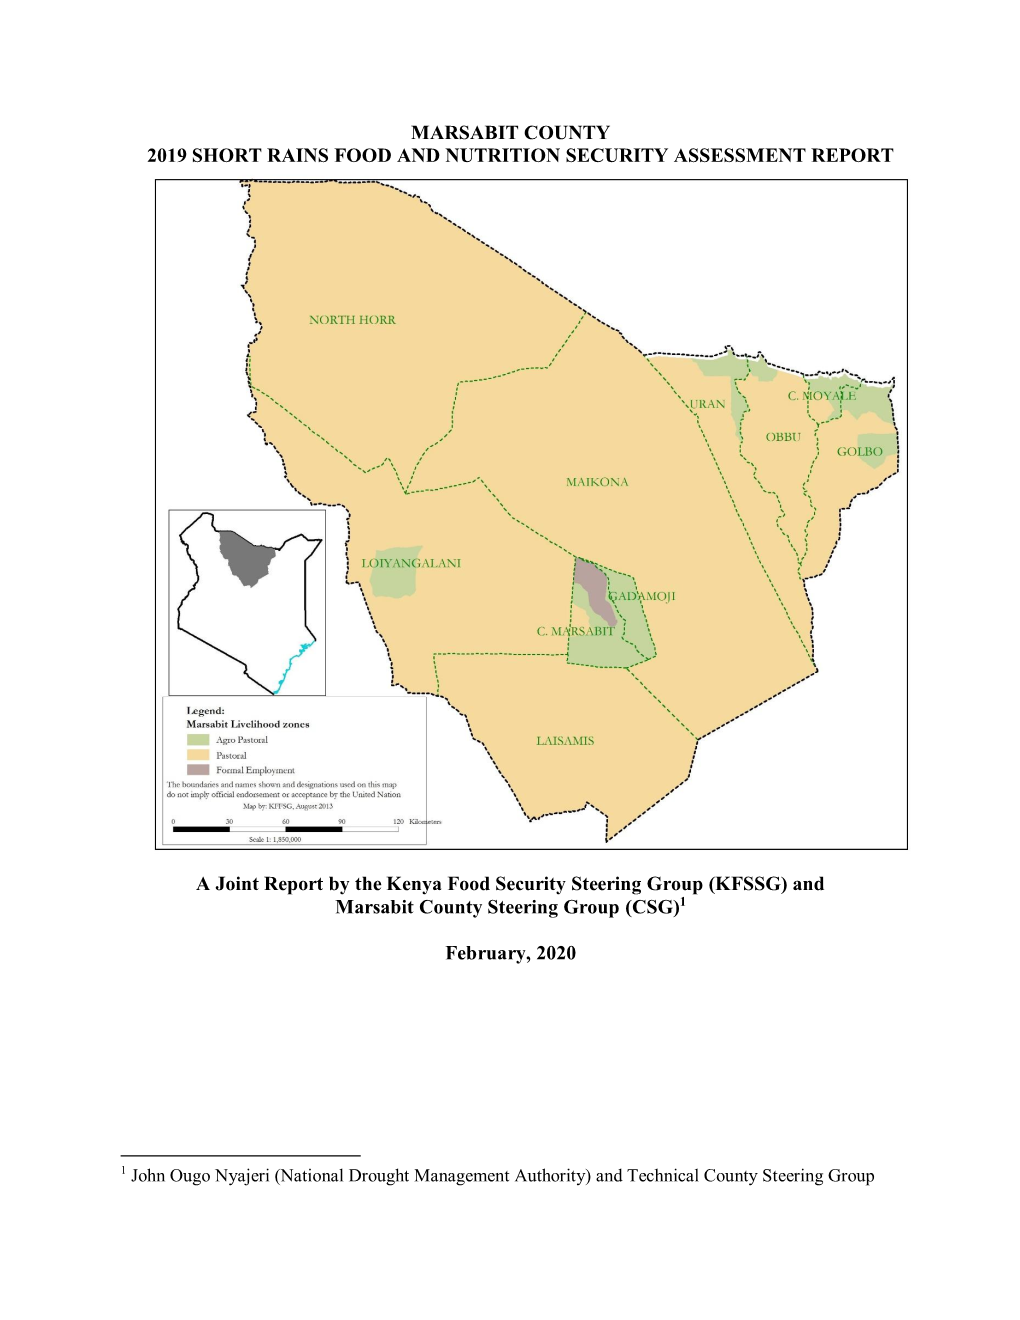 MARSABIT COUNTY 2019 SHORT RAINS FOOD and NUTRITION SECURITY ASSESSMENT REPORT a Joint Report by the Kenya Food Security Steerin